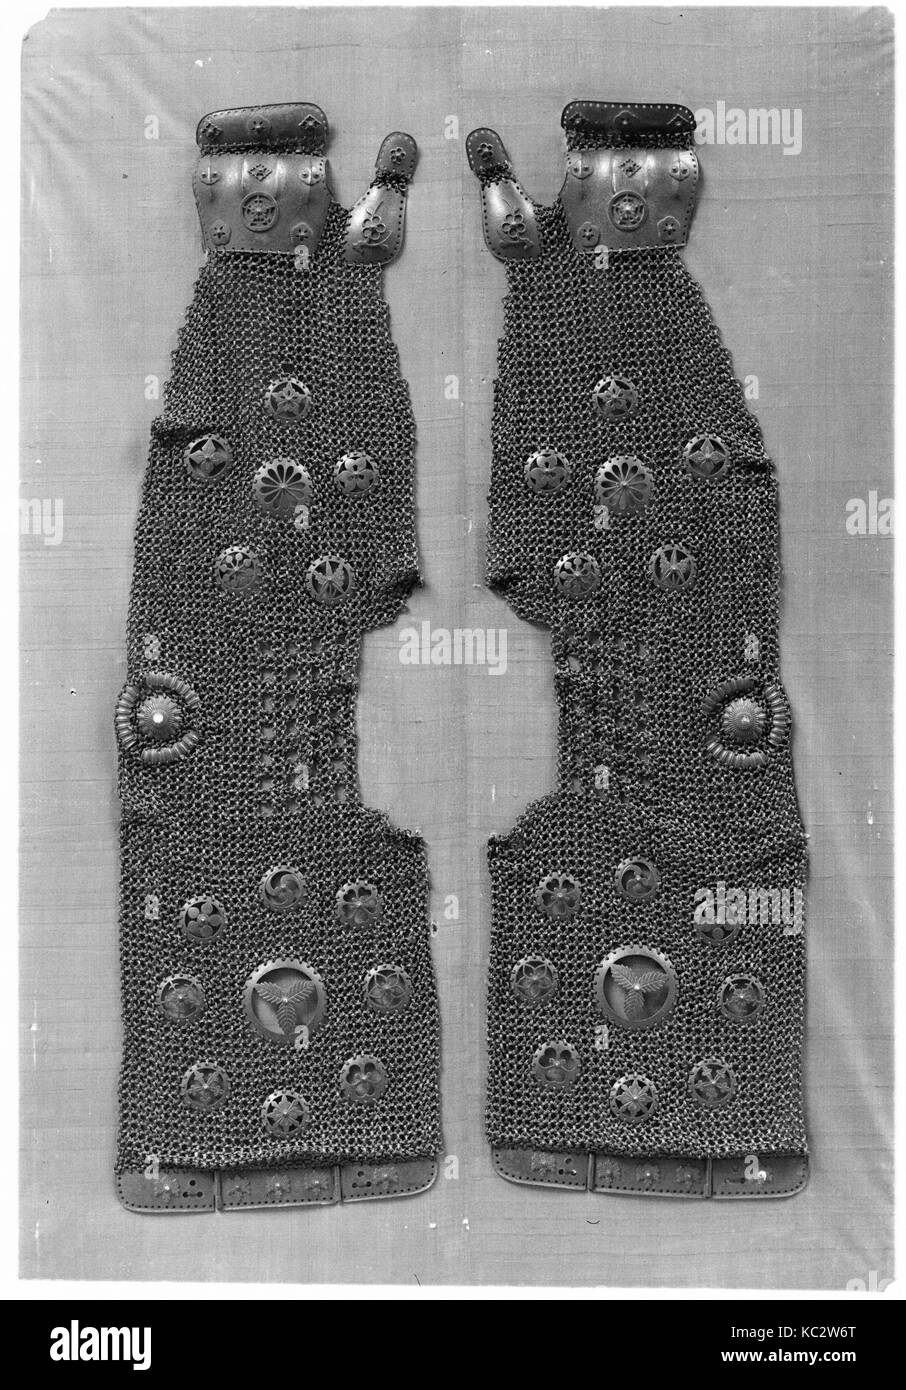 Pair of Sleeves (Kotē), 18th century, Japanese, Chainmail, L. 26 1/2 in. (67.3 cm), Armor Parts-Arms & Shoulders Stock Photo